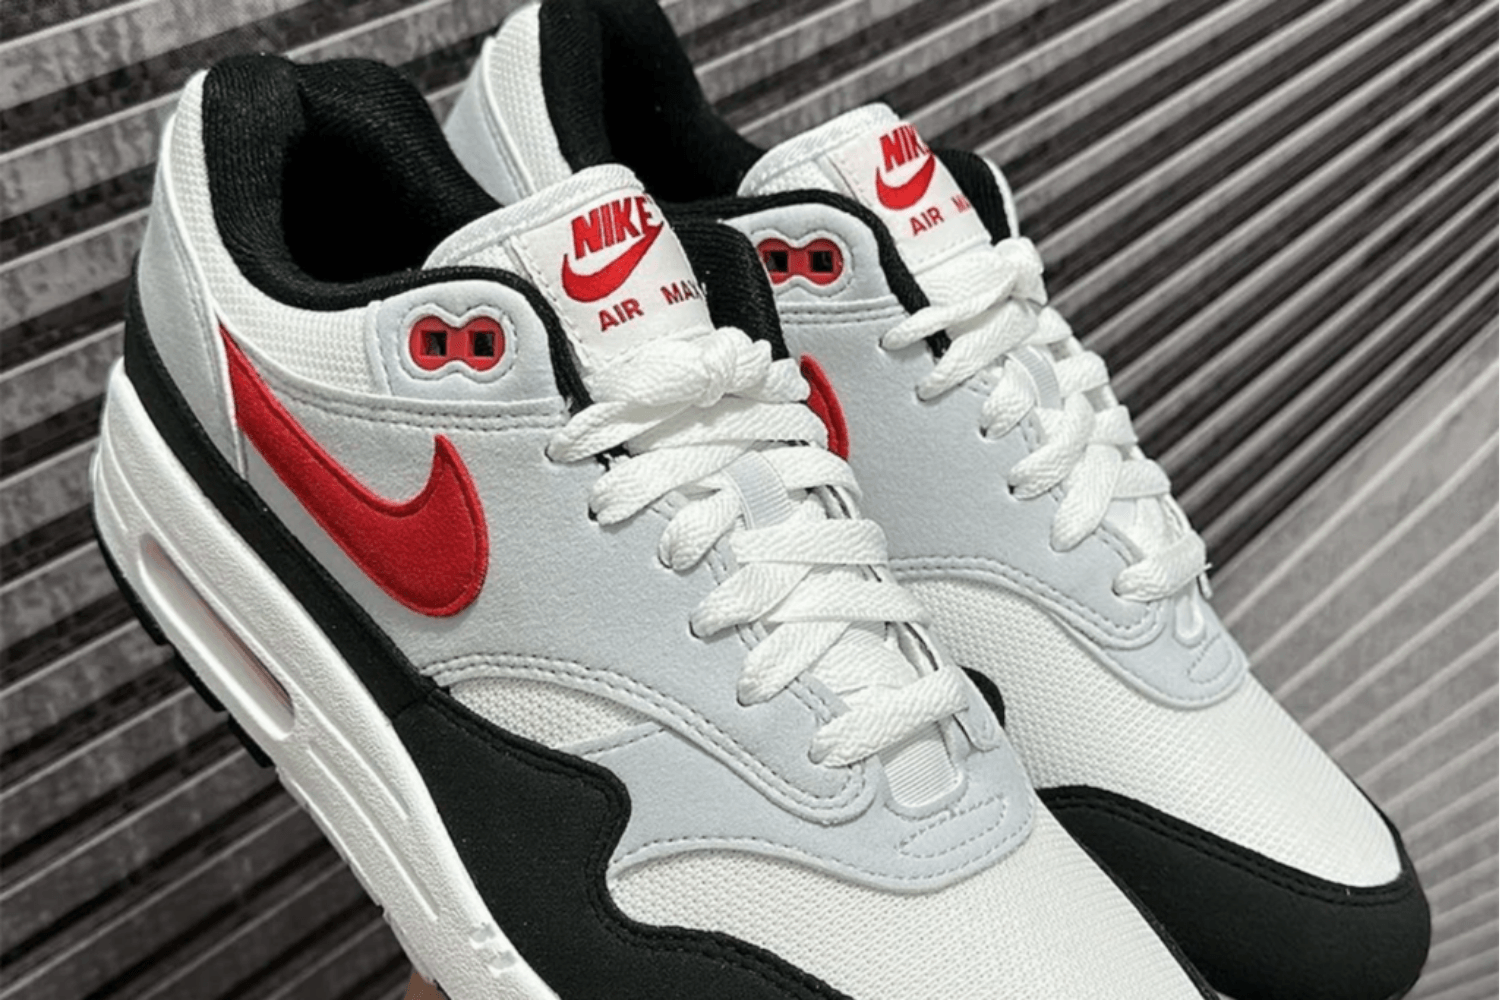 Will the Nike Air Max 1 'Chili' return in 2023?